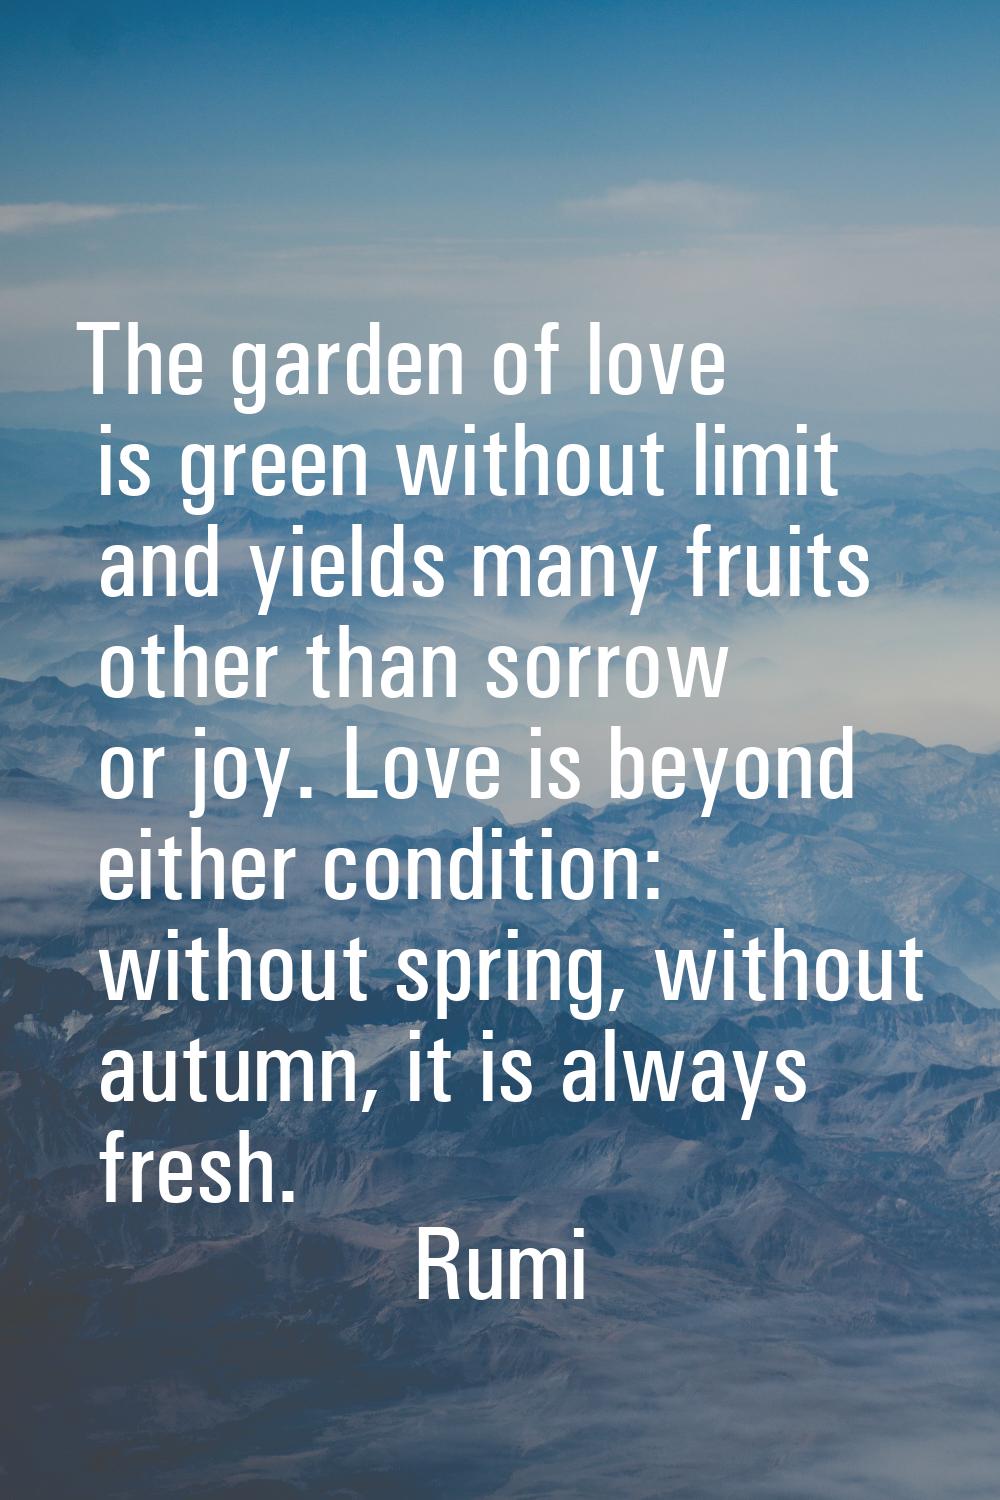 The garden of love is green without limit and yields many fruits other than sorrow or joy. Love is 